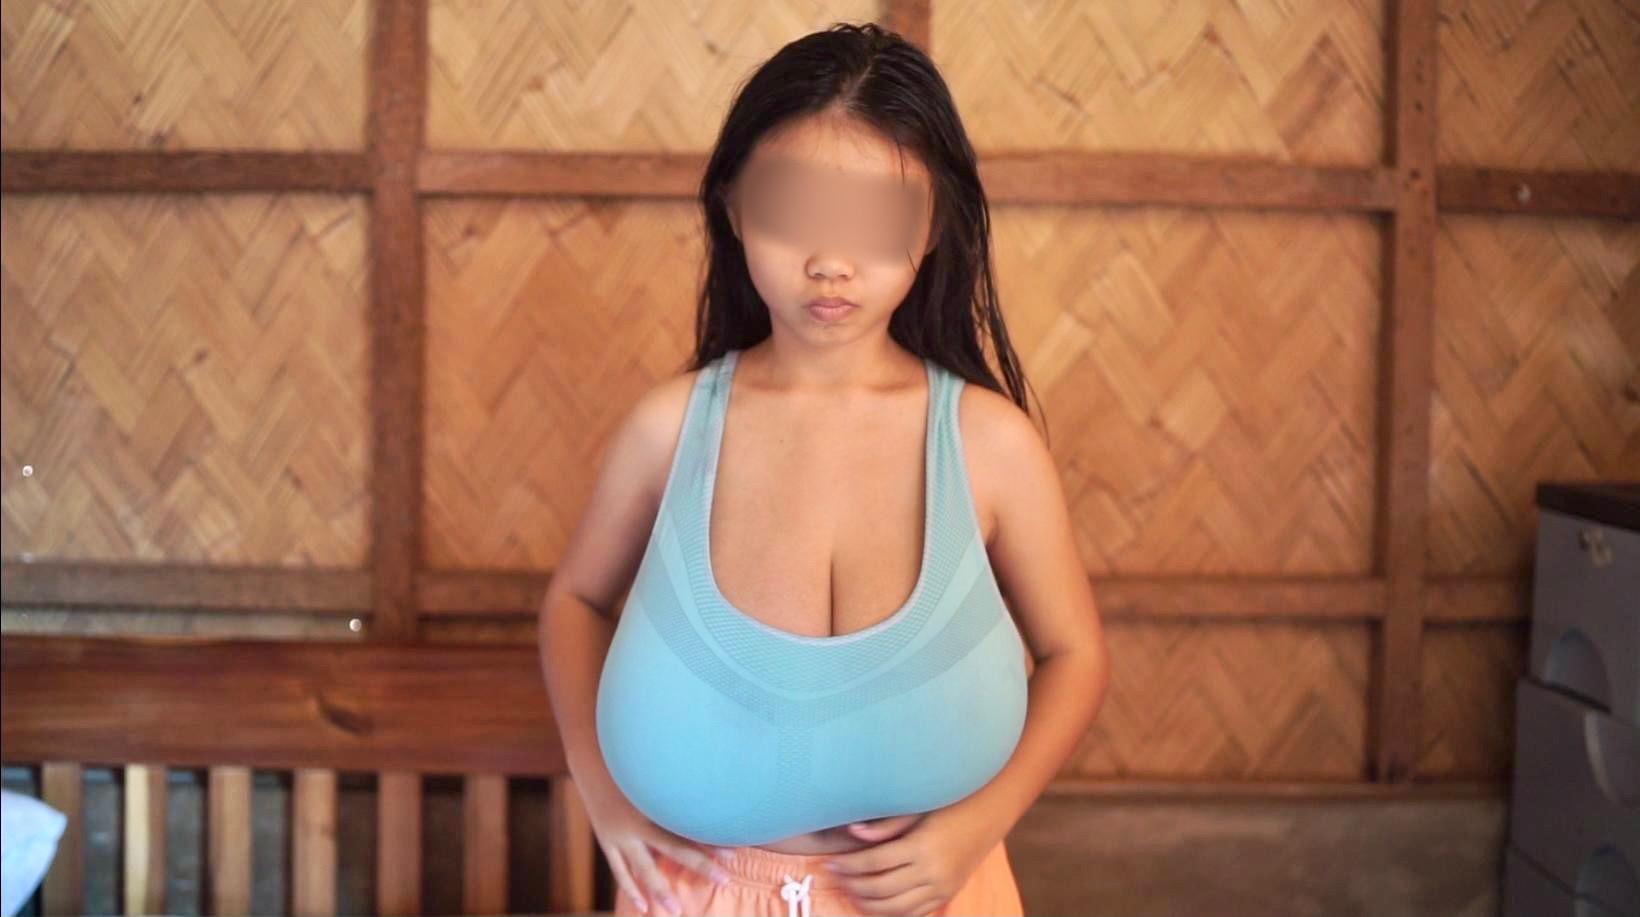 arshed sheikh share biggest asian tits in the world photos